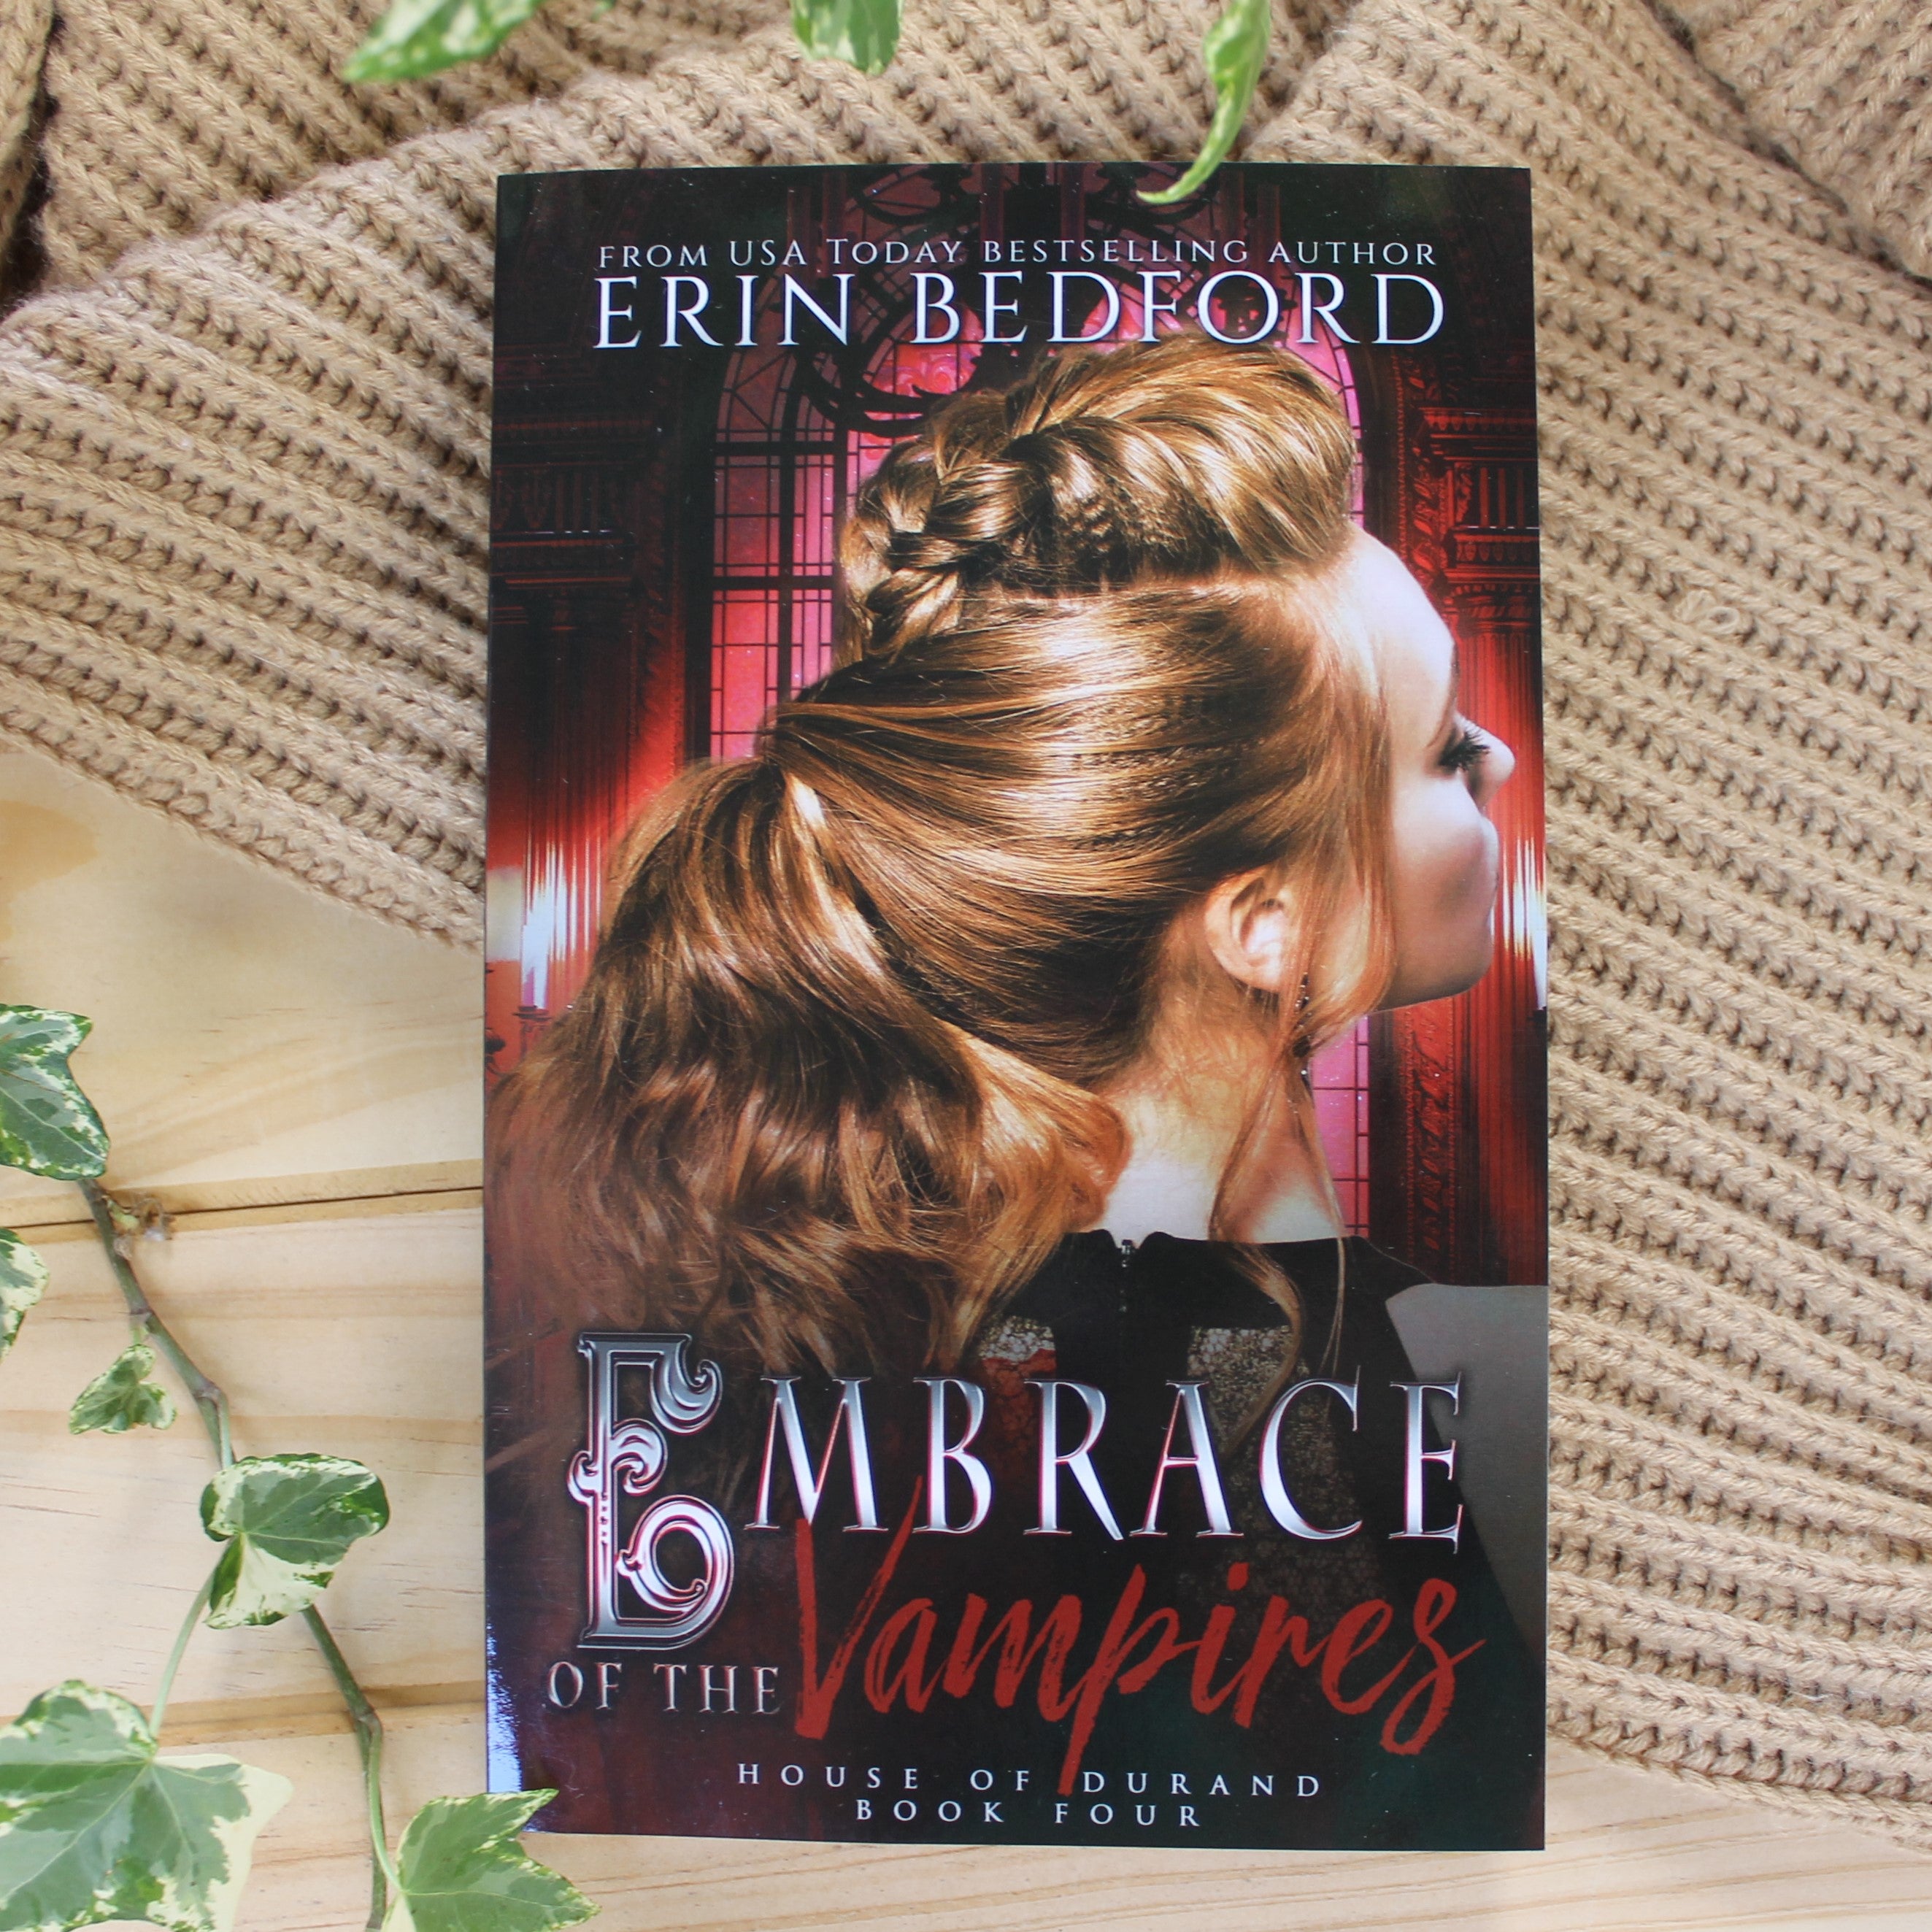 House of Durand series by Erin Bedford